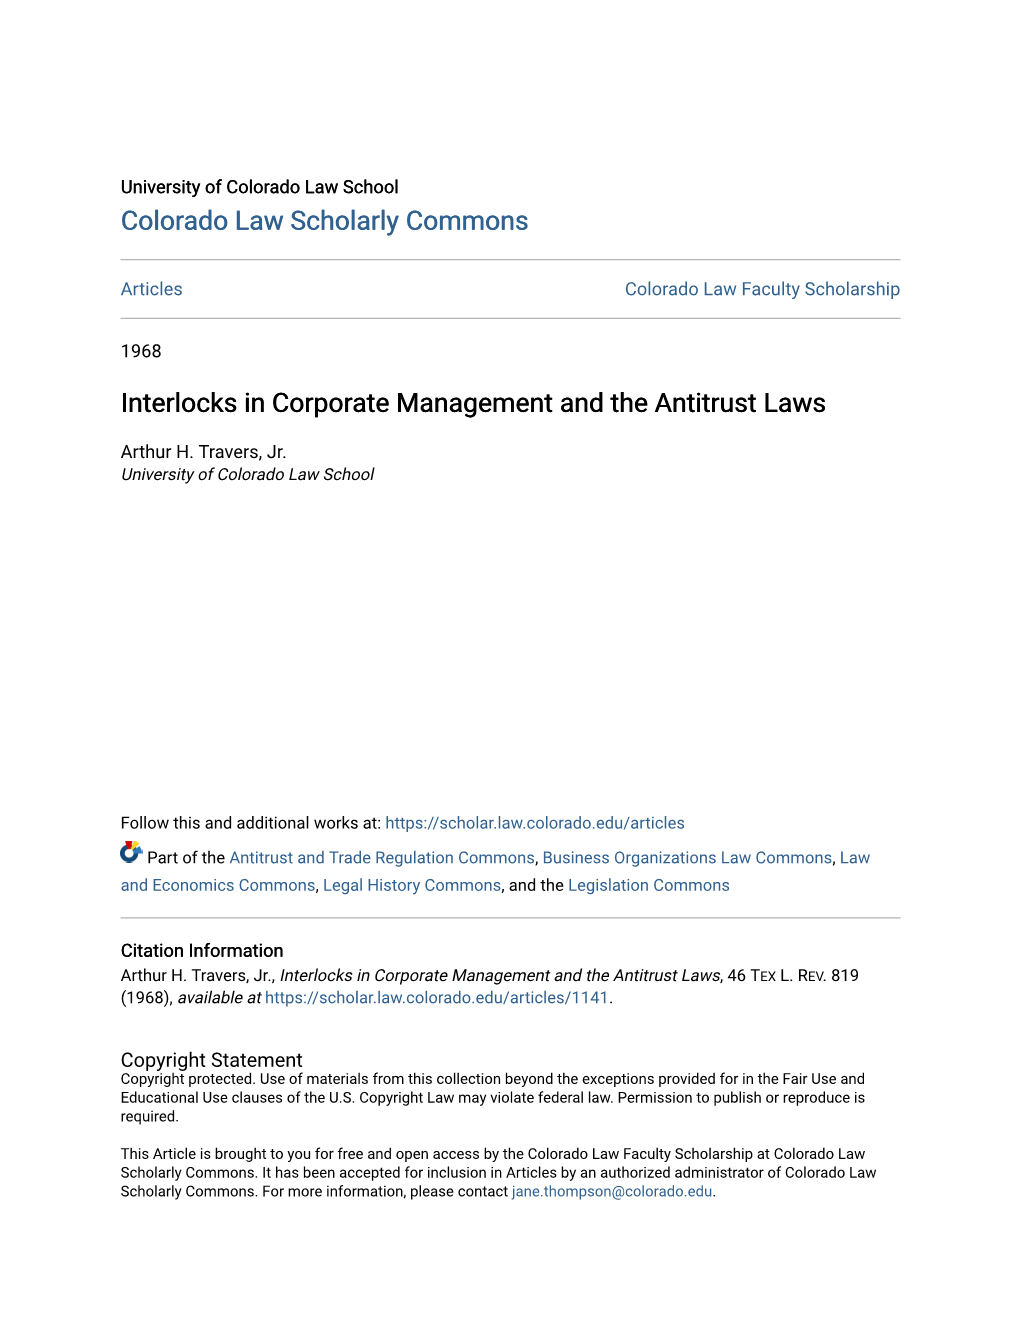 Interlocks in Corporate Management and the Antitrust Laws